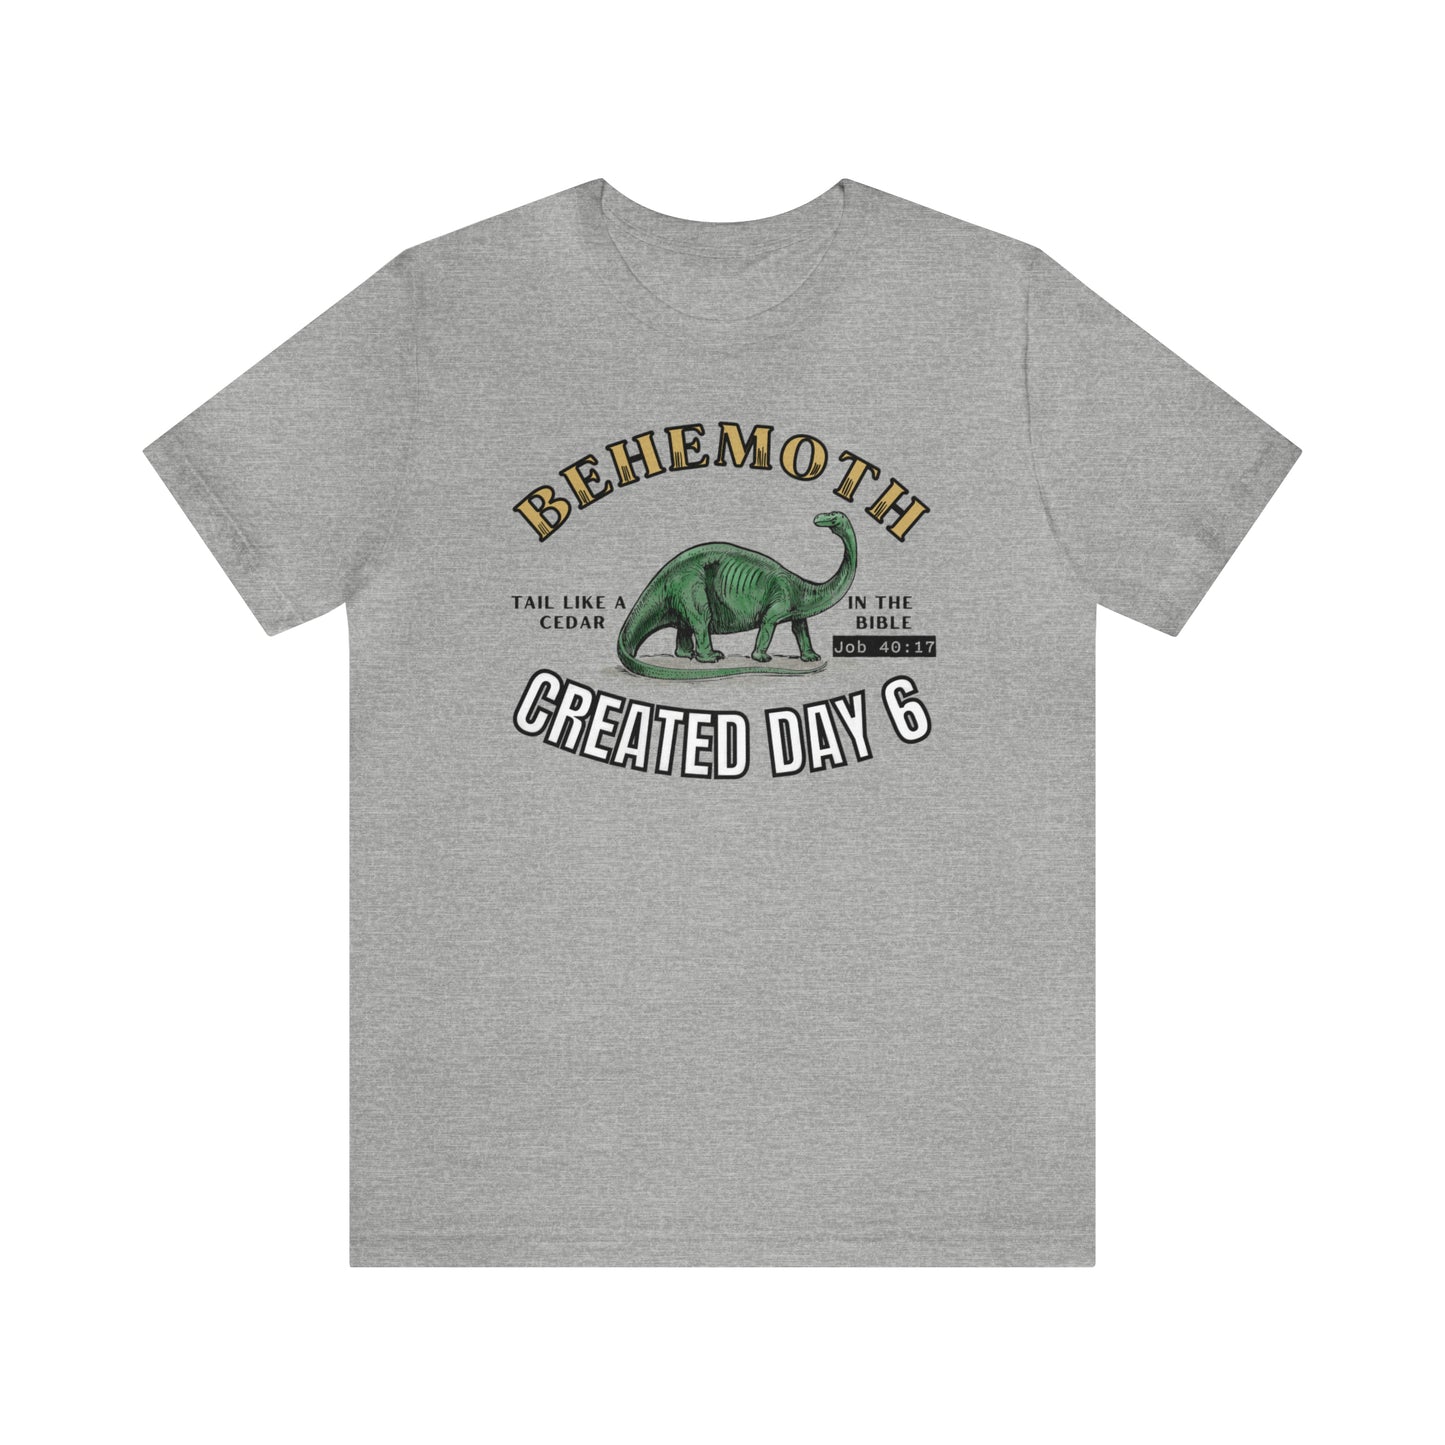 The Dinosaur Created Day 6 (Green Pastures Apparel)